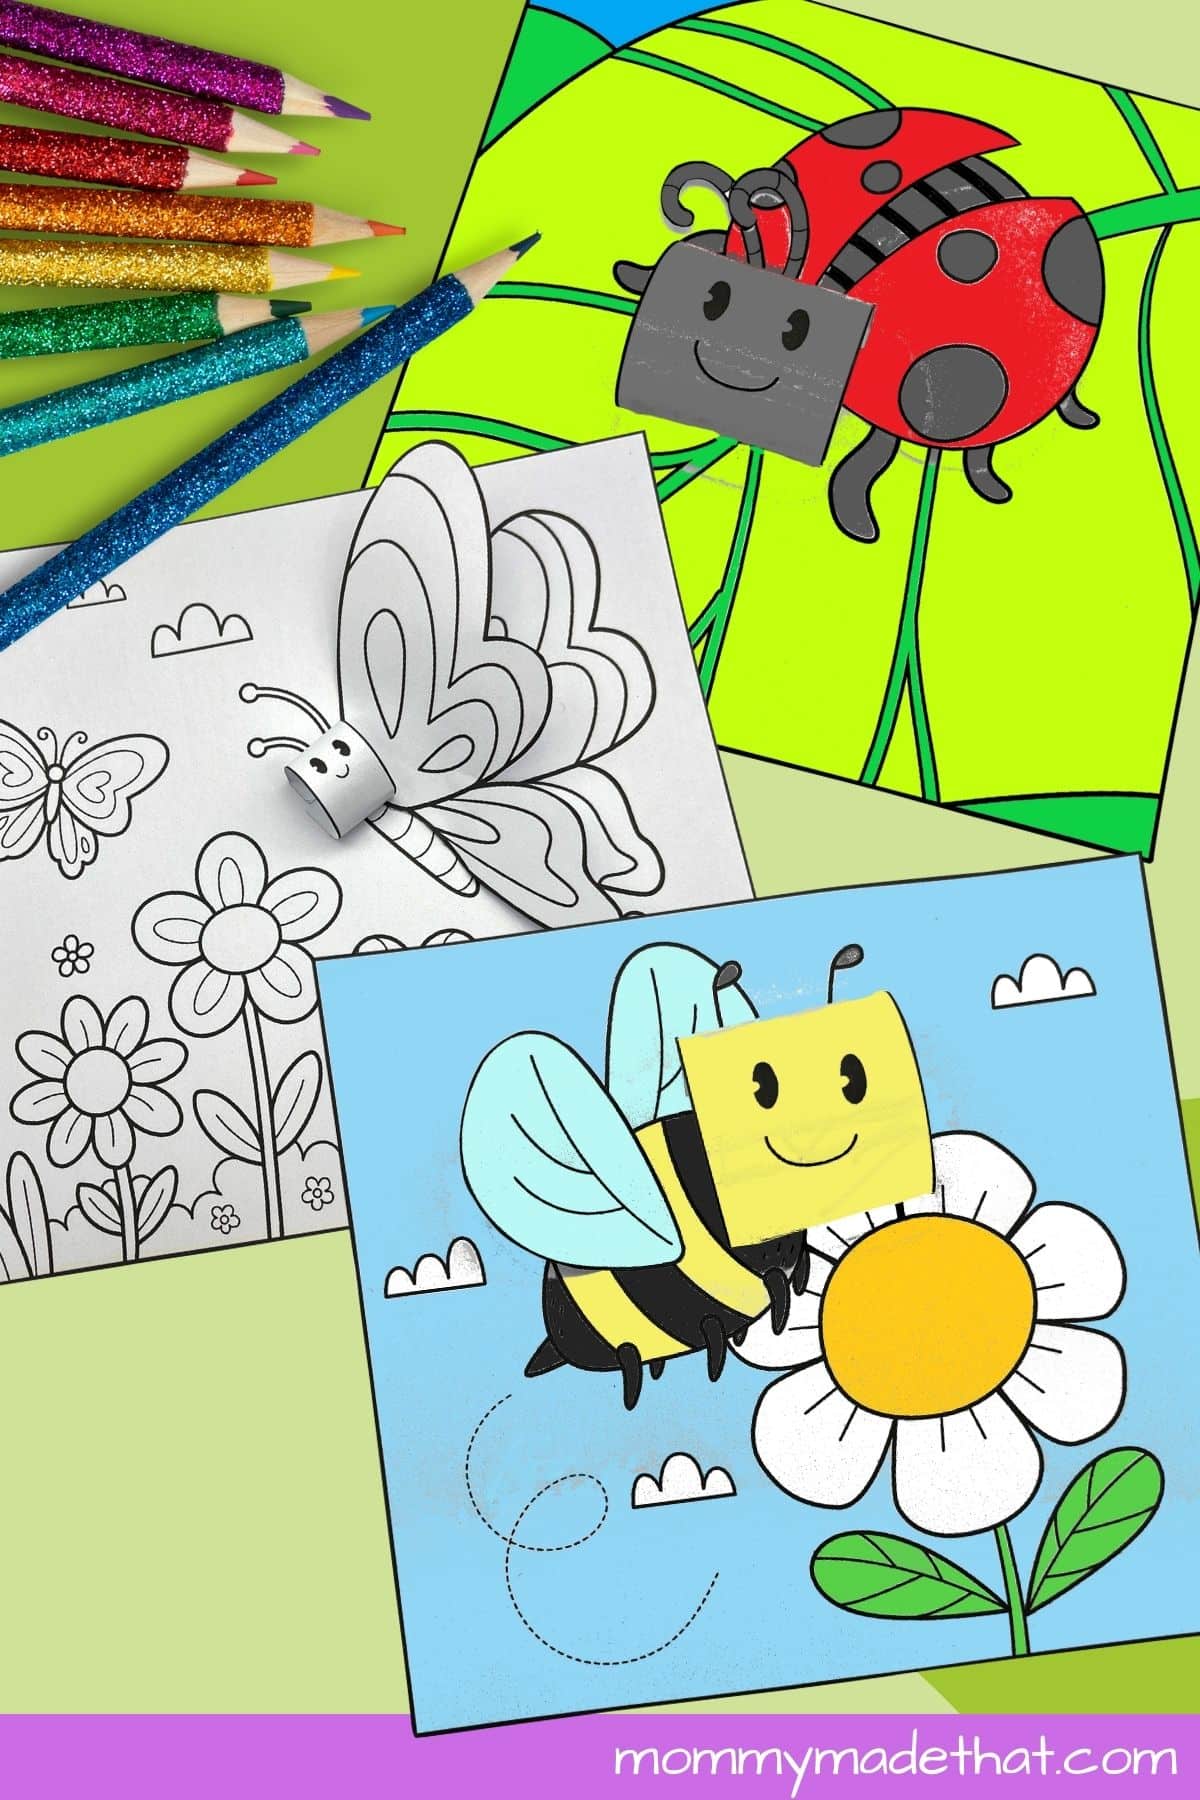 D bug coloring pages free printables